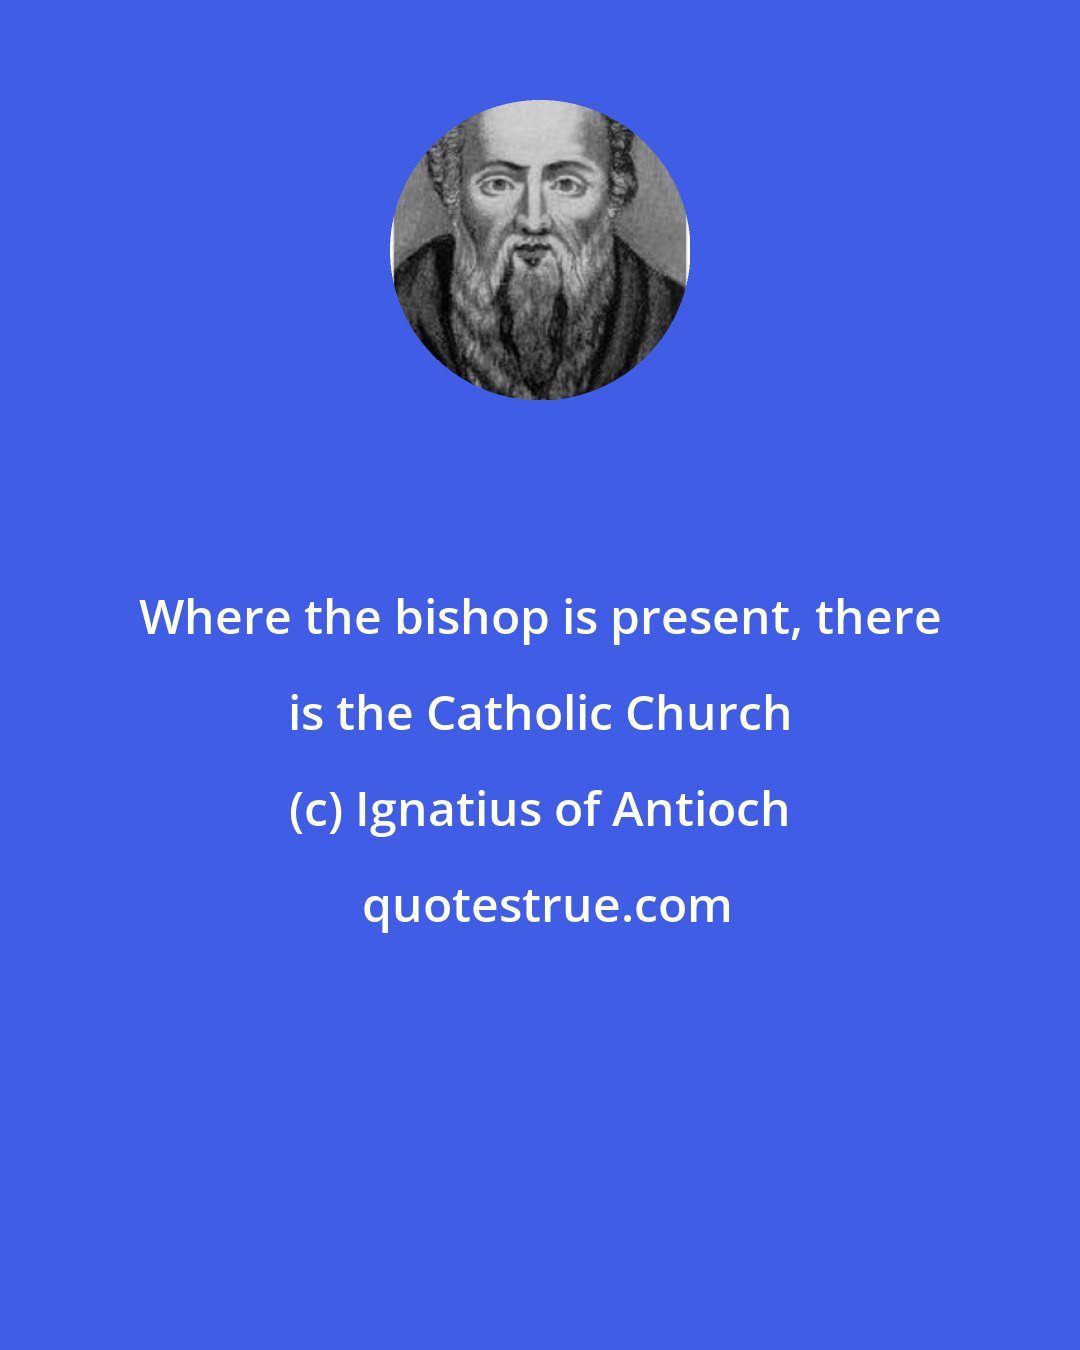 Ignatius of Antioch: Where the bishop is present, there is the Catholic Church